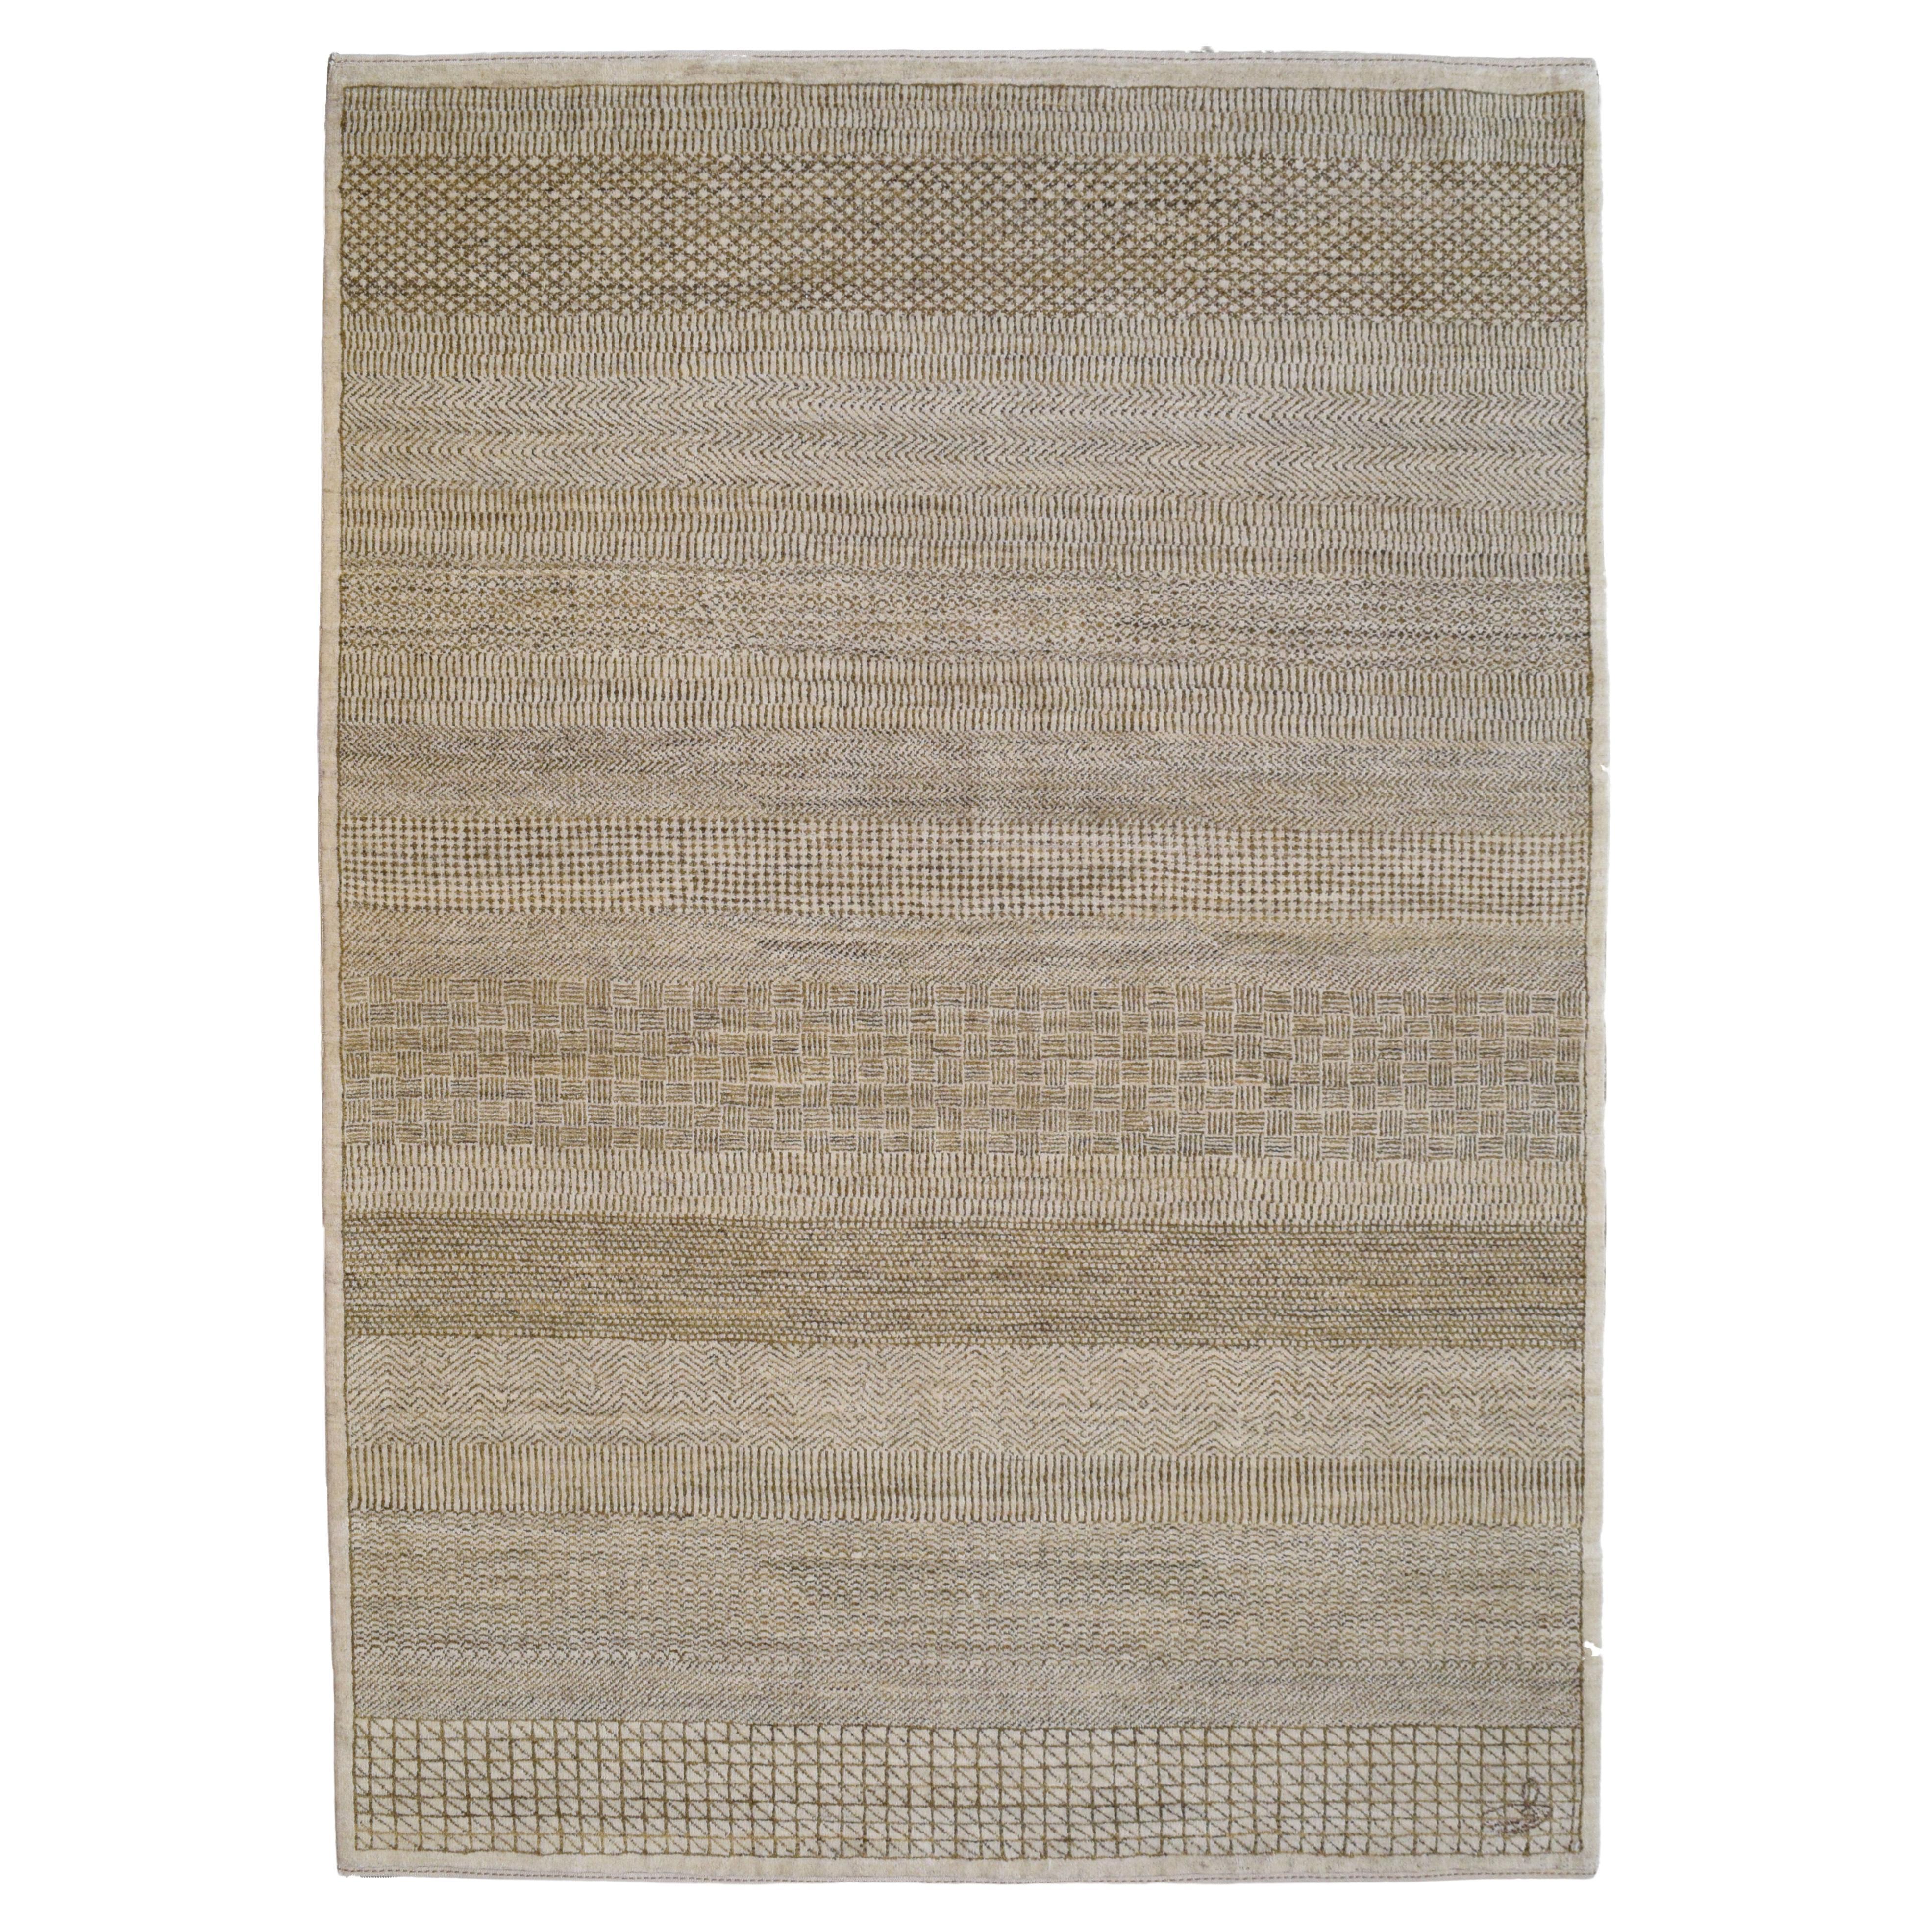 Brown and Cream Modern Persian Area Rug from Orley Shabahang, 5 x 7